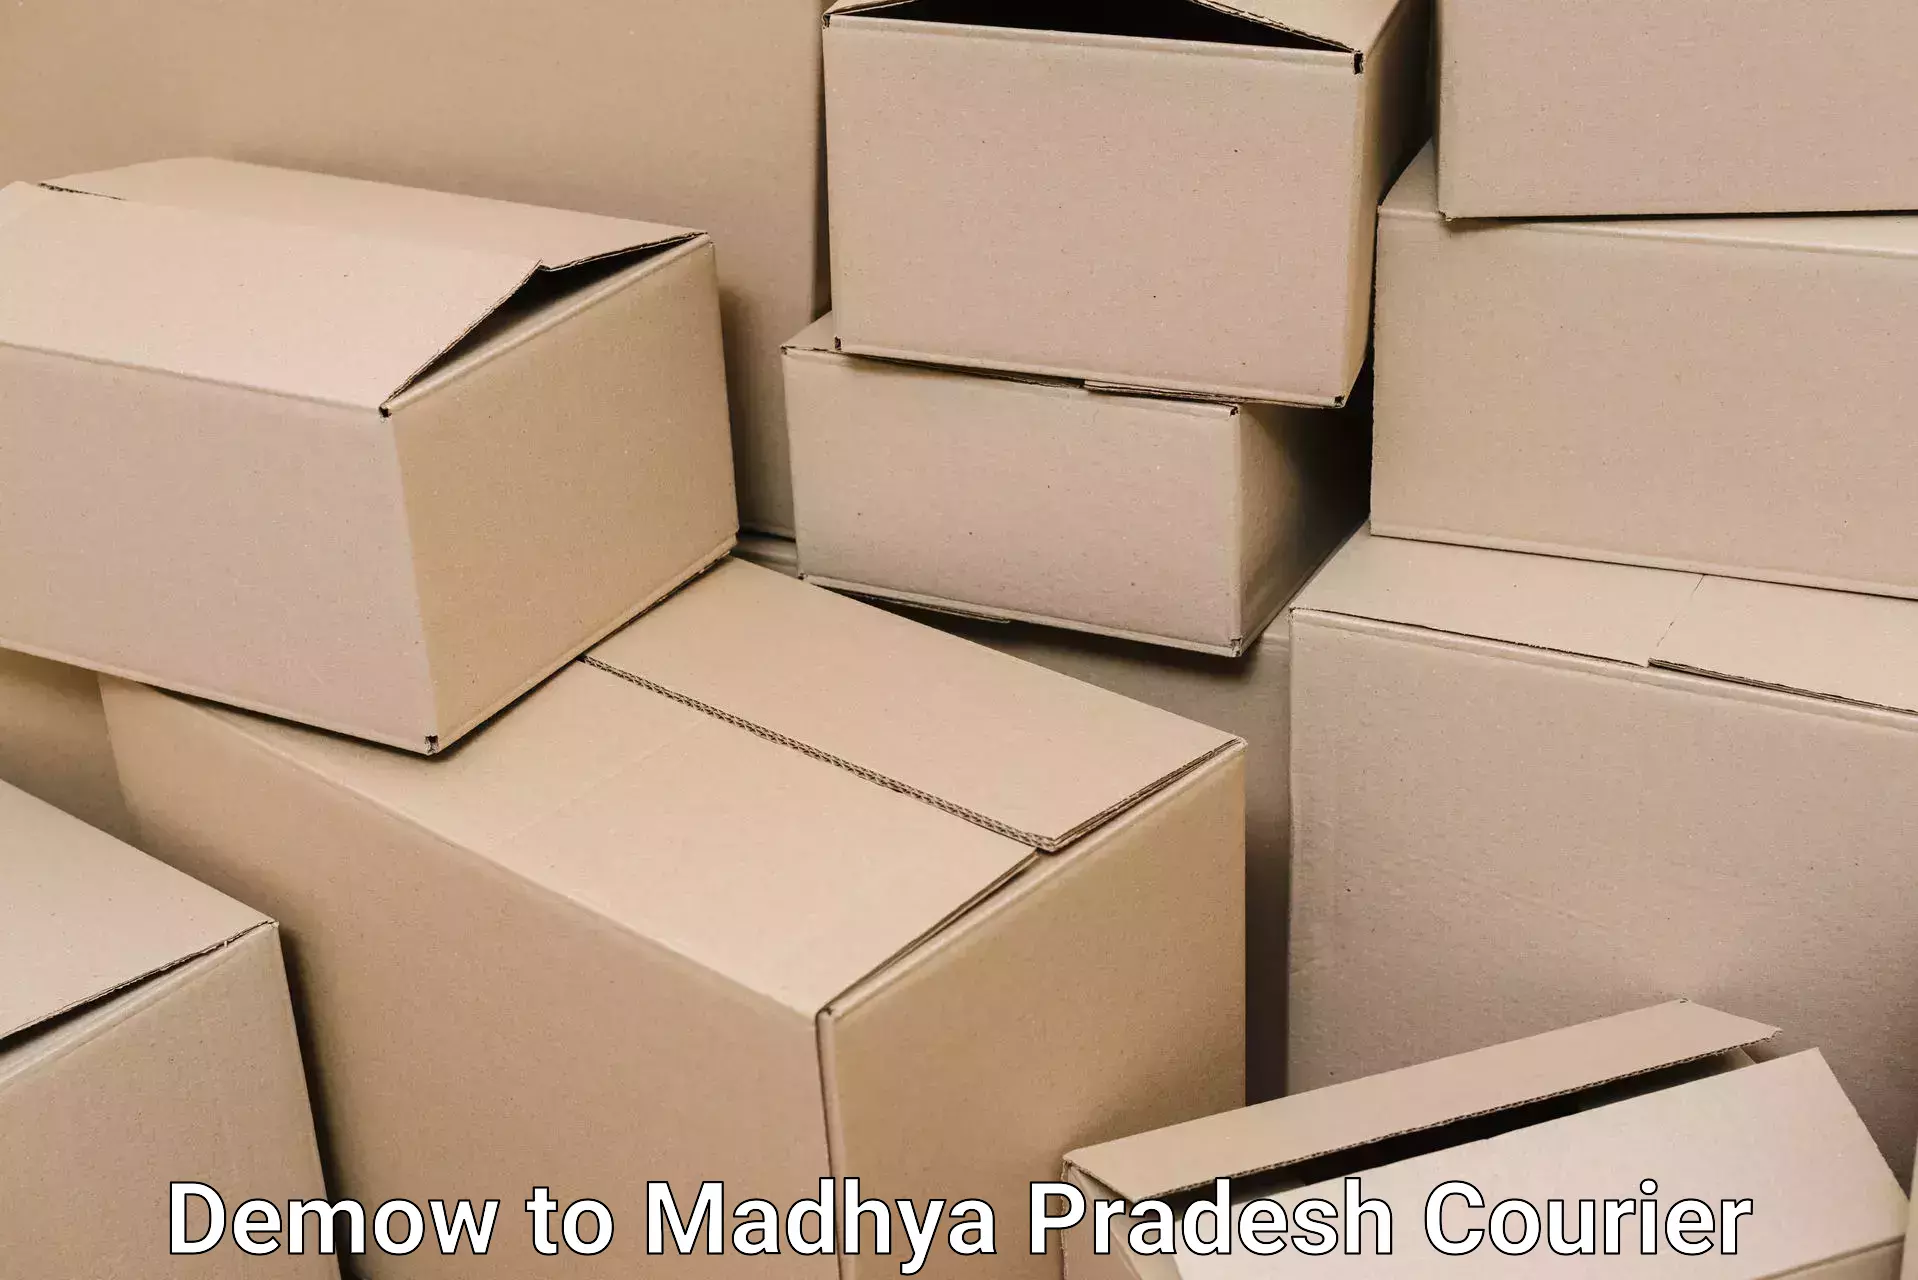 Furniture relocation experts Demow to Nalkheda